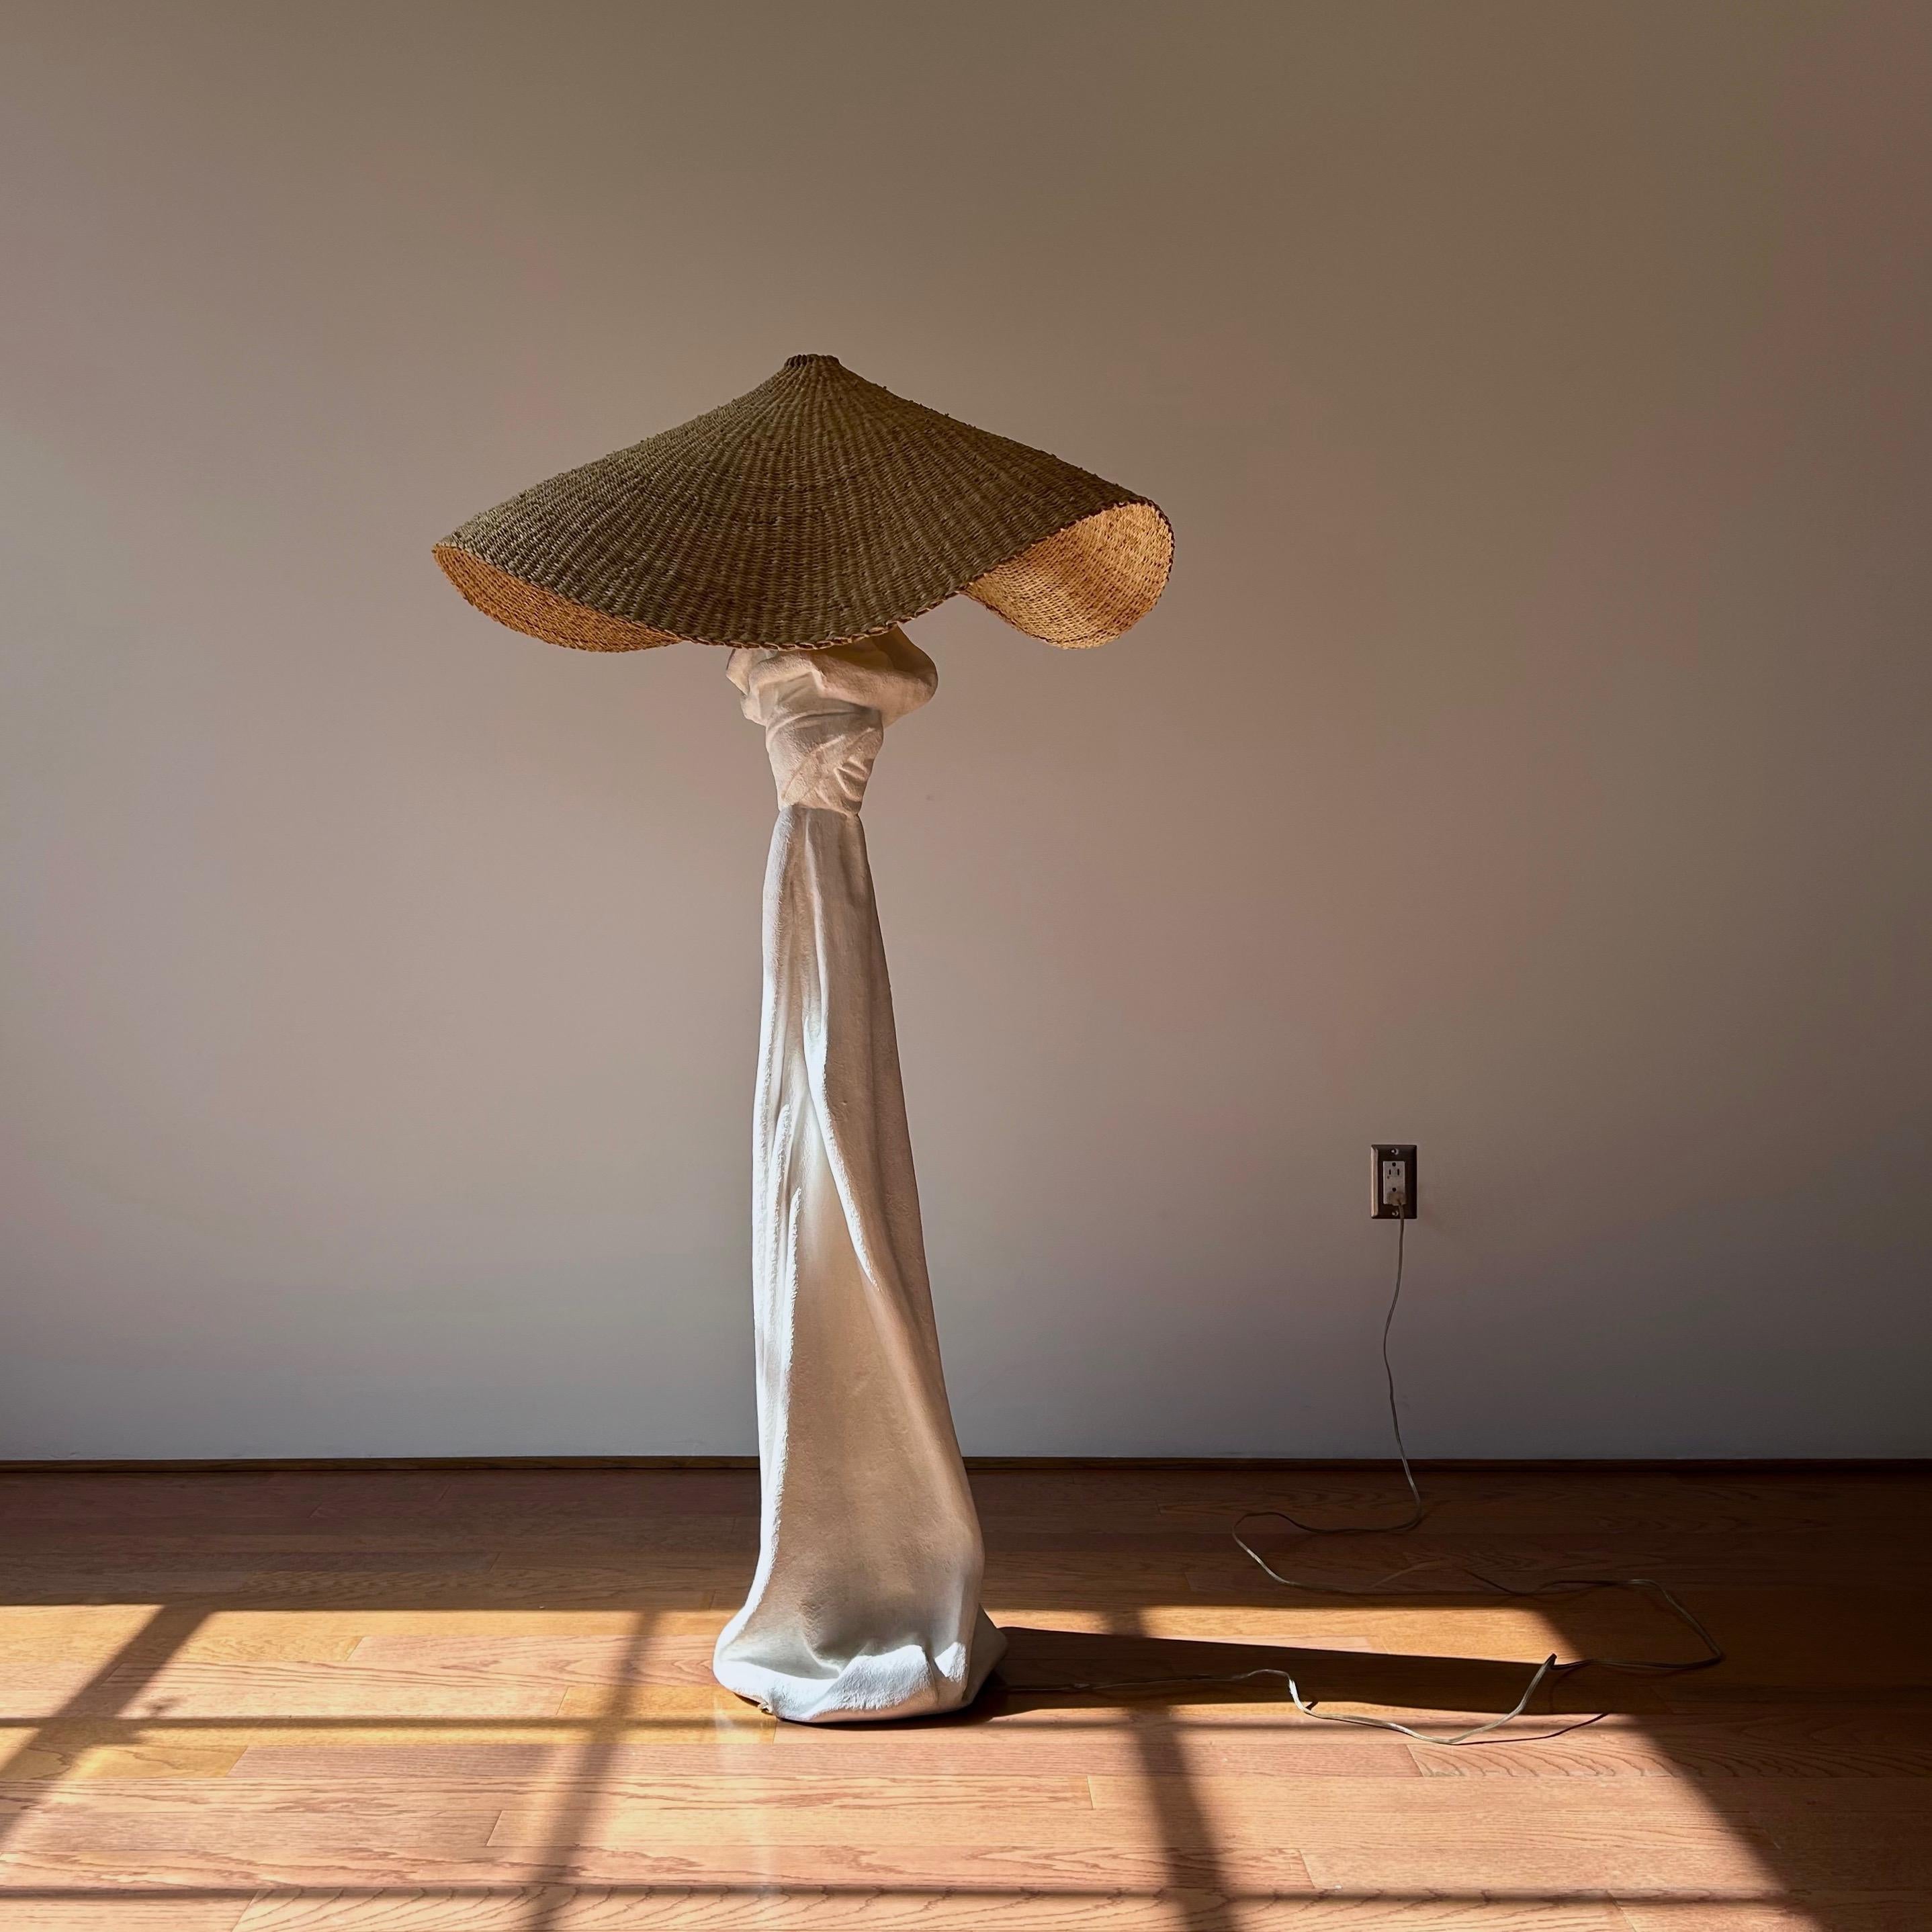 A playful plaster drape lamp with large Twenty One Tonnes landslide shade. Good vintage condition with minor scuffs and marks - see images for details and contact us for more. Matte finish.

Our landslide light shades are handwoven from elephant